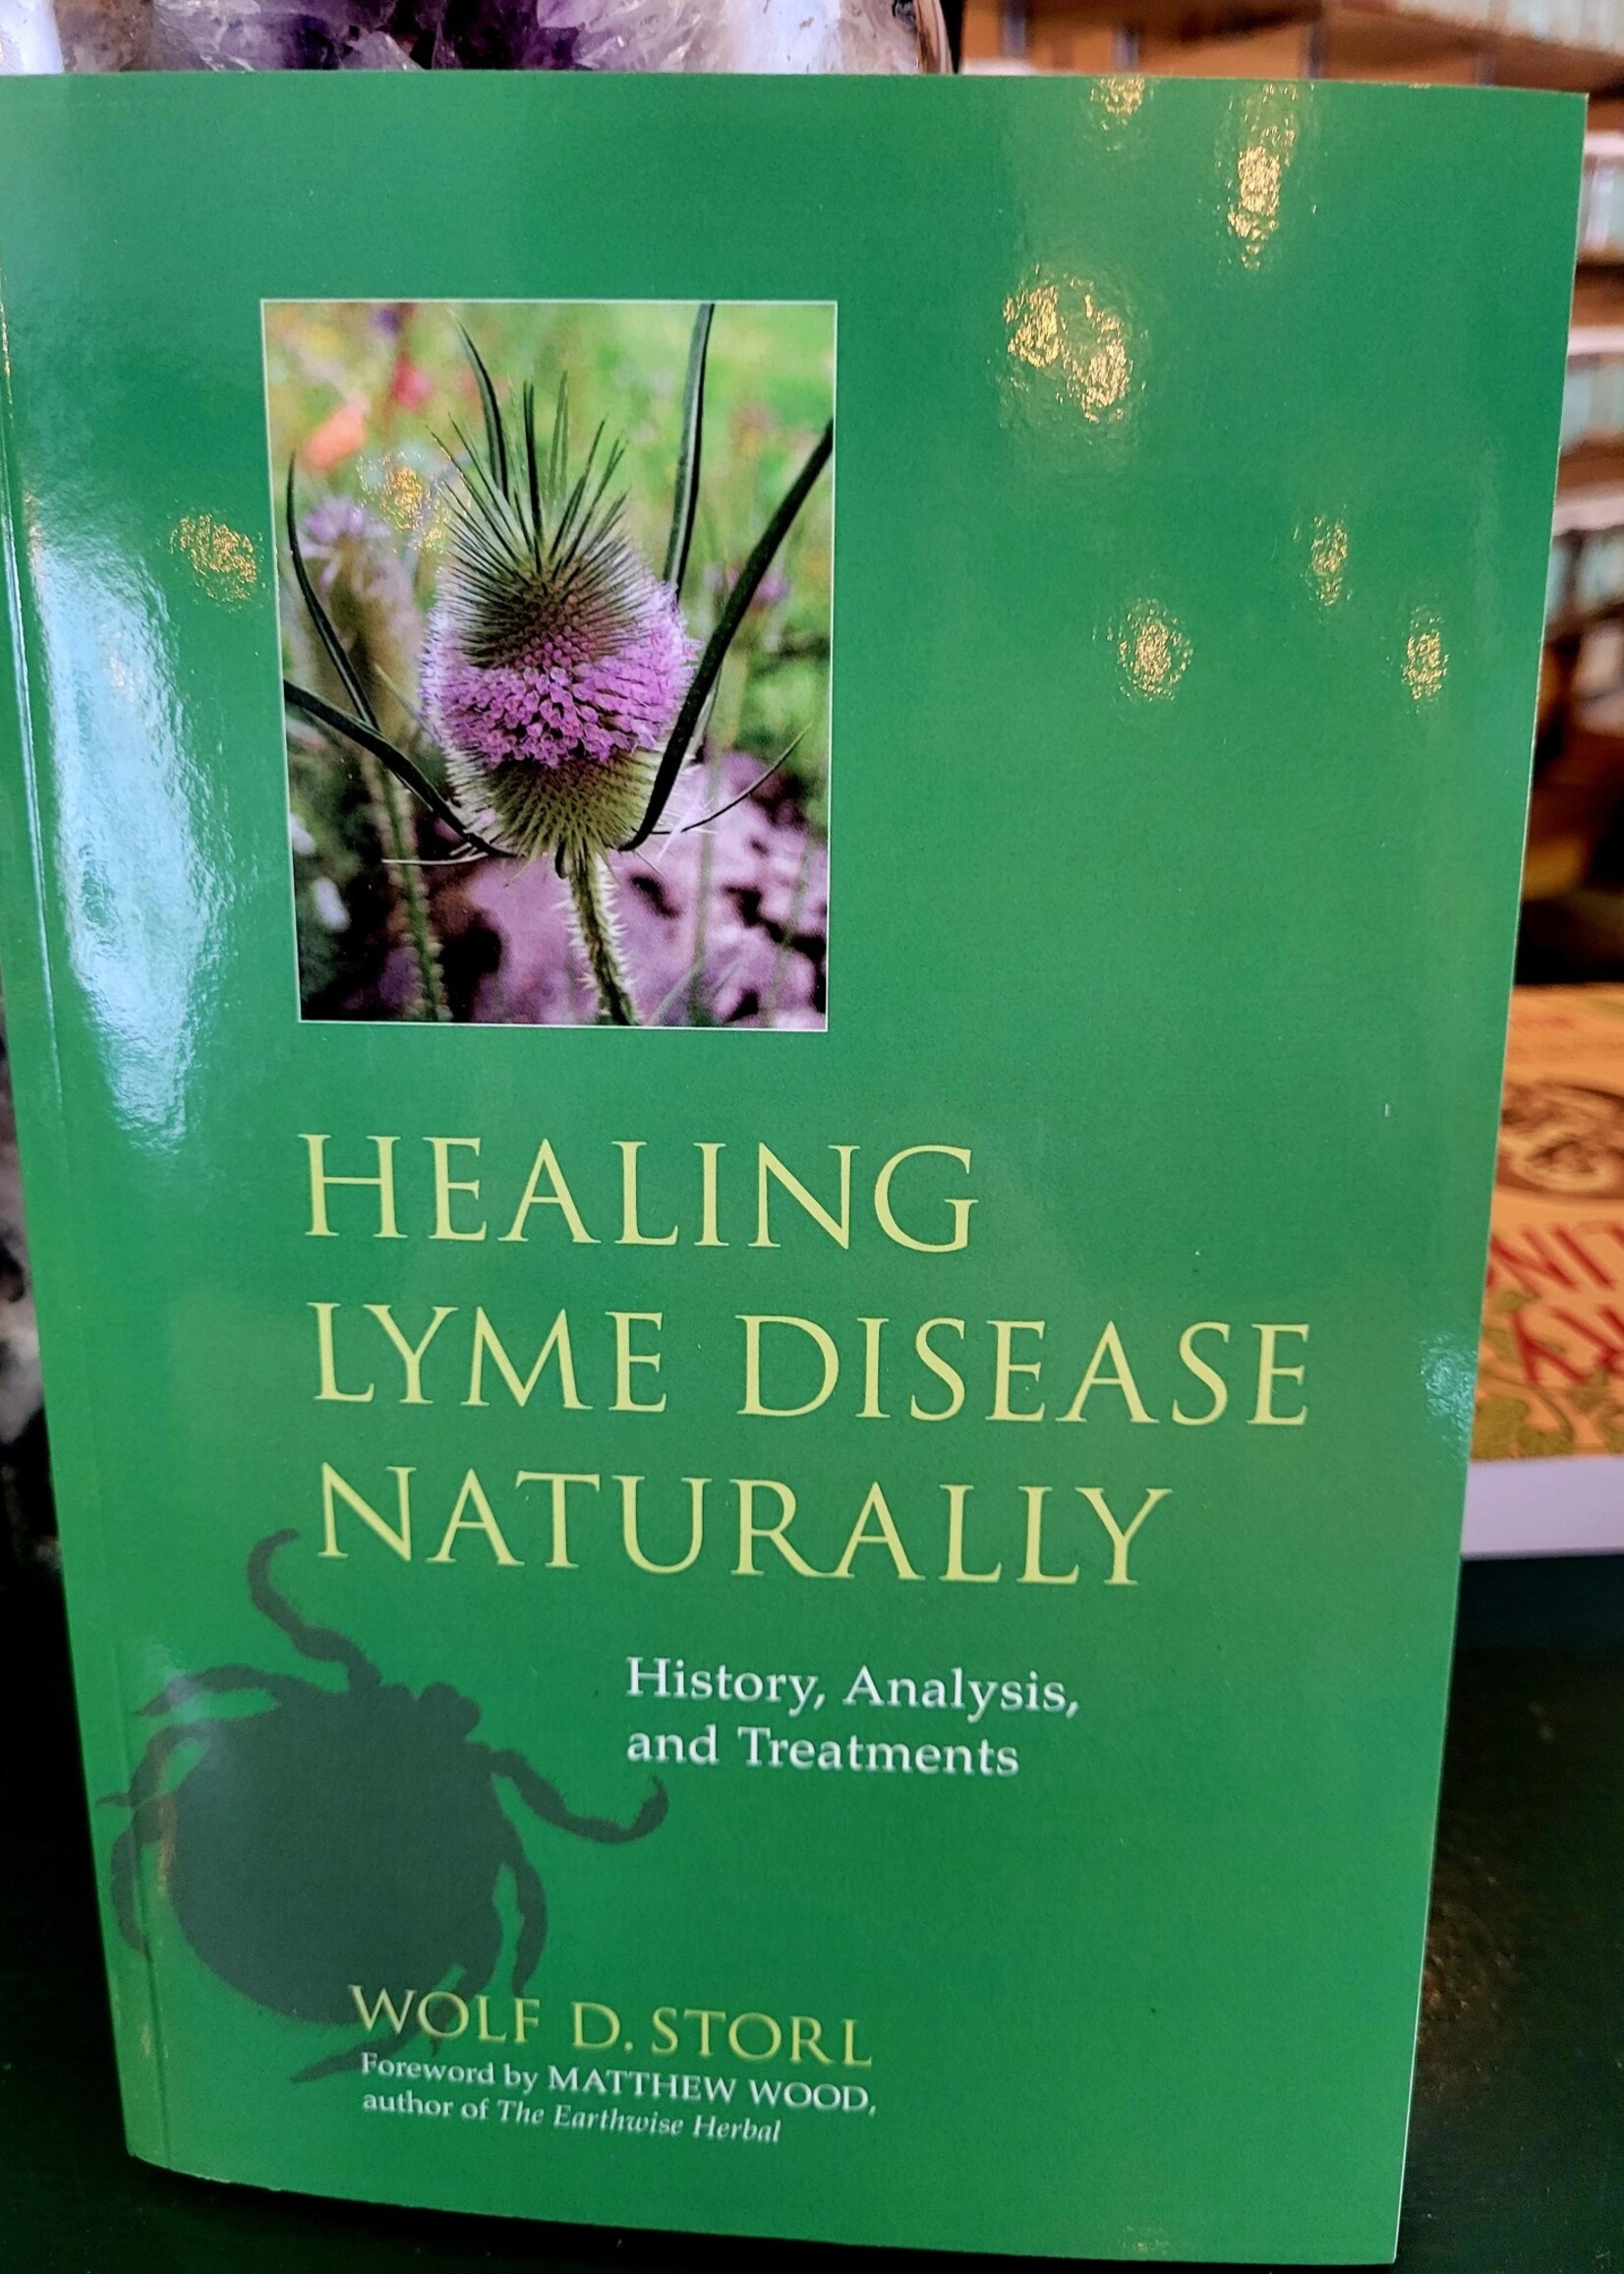 Healing Lyme Disease Naturally By Wolf D. Storl Foreword by Matthew Wood and Andreas Thum, M.D.